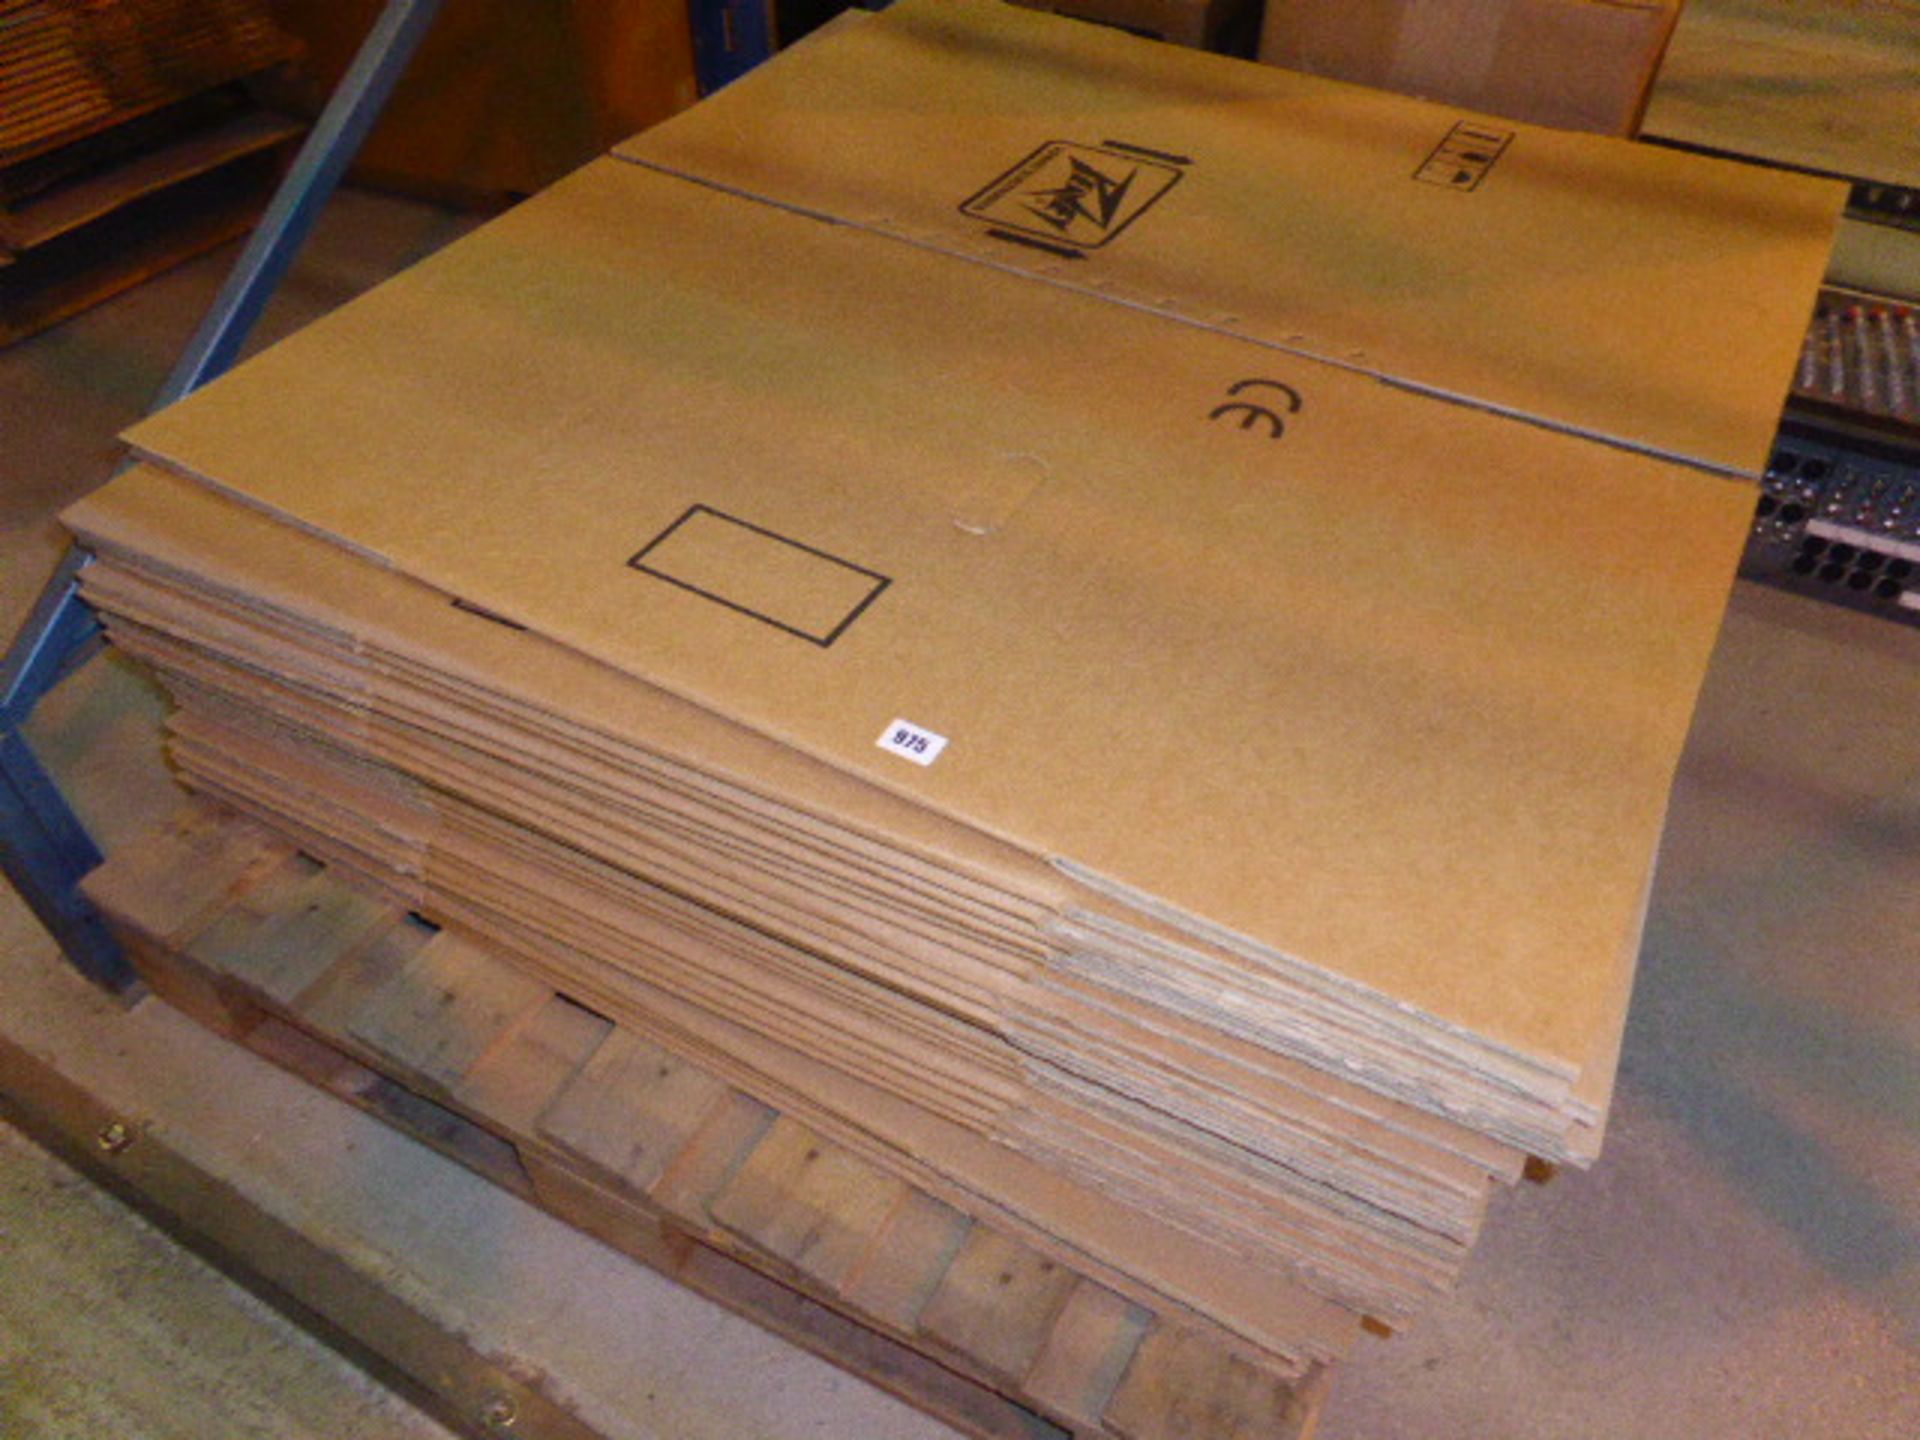 Small pallet of large cardboard boxes